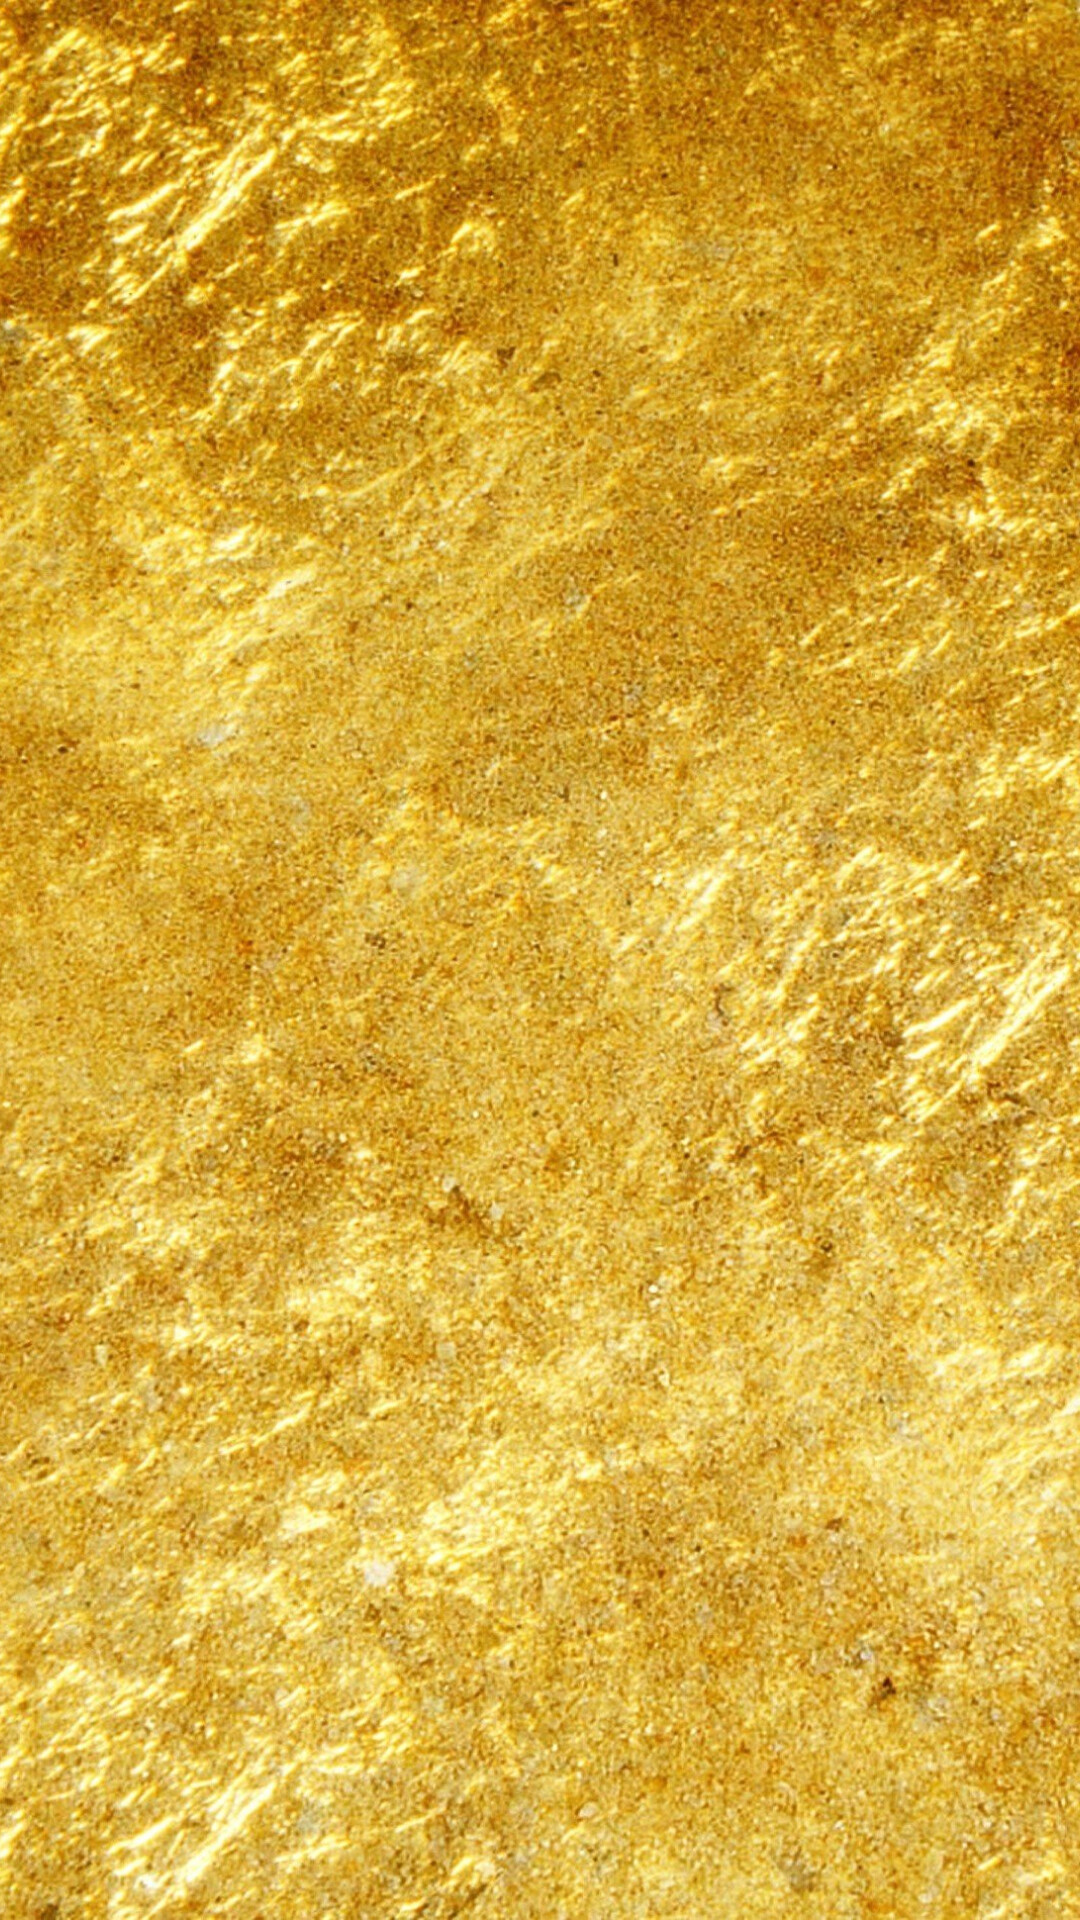 Gold Foil: The surface covered with thin golden sheets layered on using a gilder's tip. 1080x1920 Full HD Background.